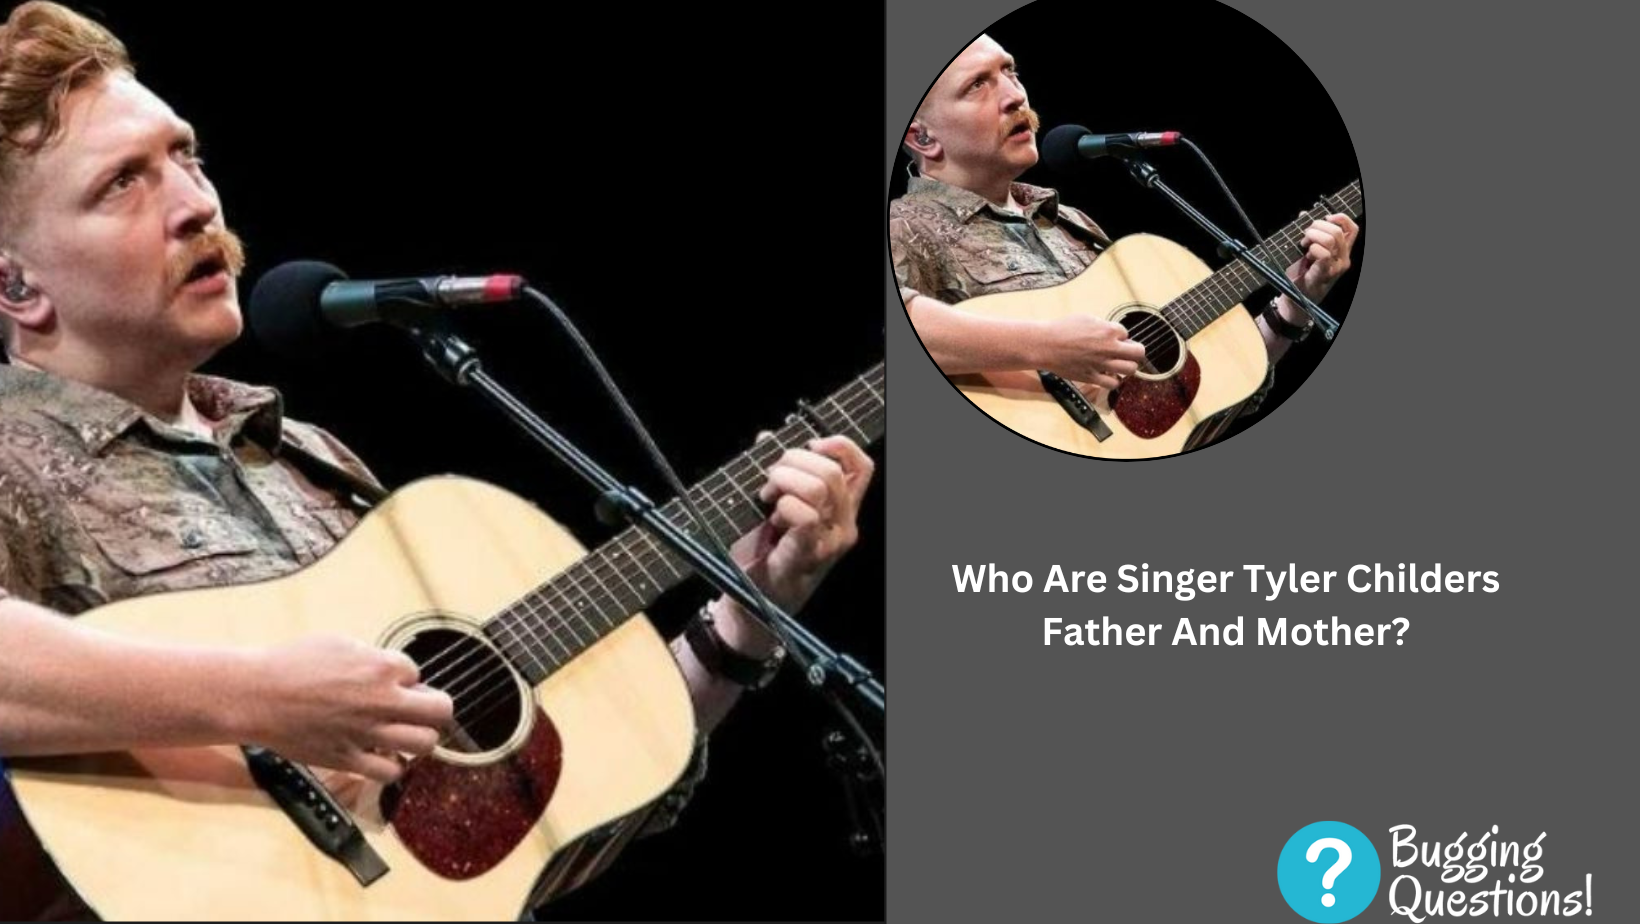 Who Are Singer Tyler Childers Father And Mother?